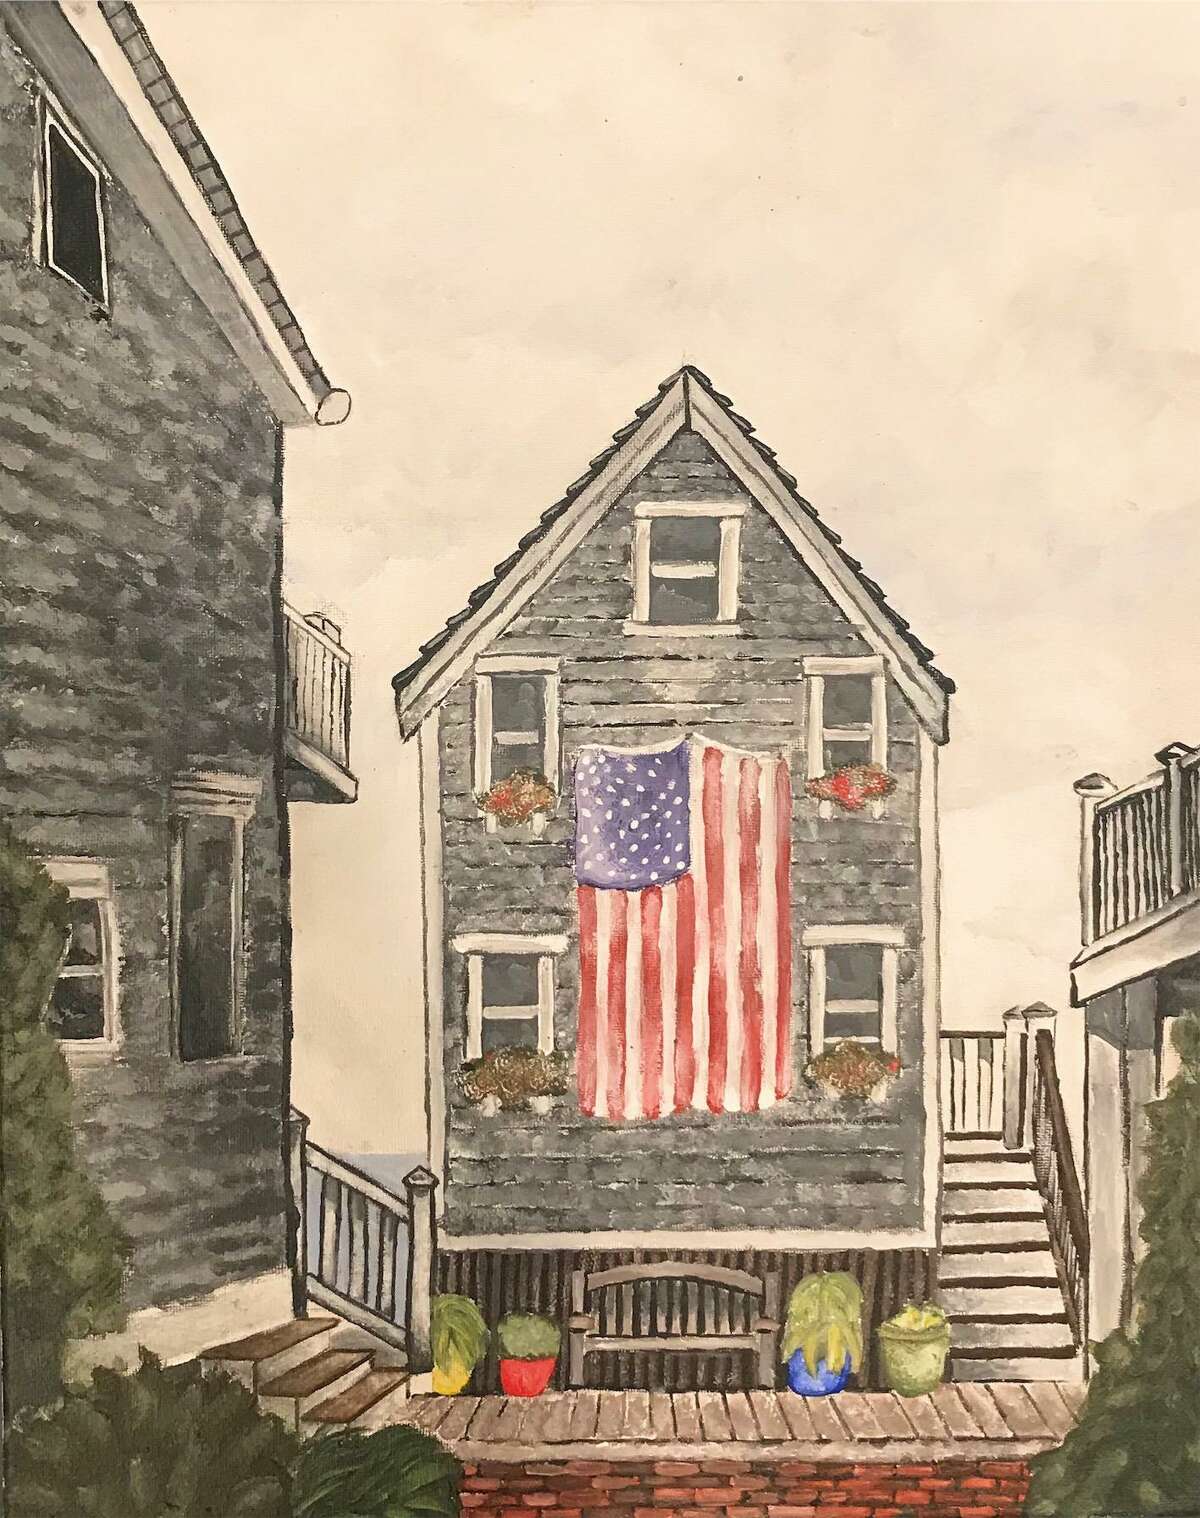 “Provincetown” by Avery Morawa, one of the works in the New Canaan Society for the Arts Member Show at the Carriage Barn Arts Center.